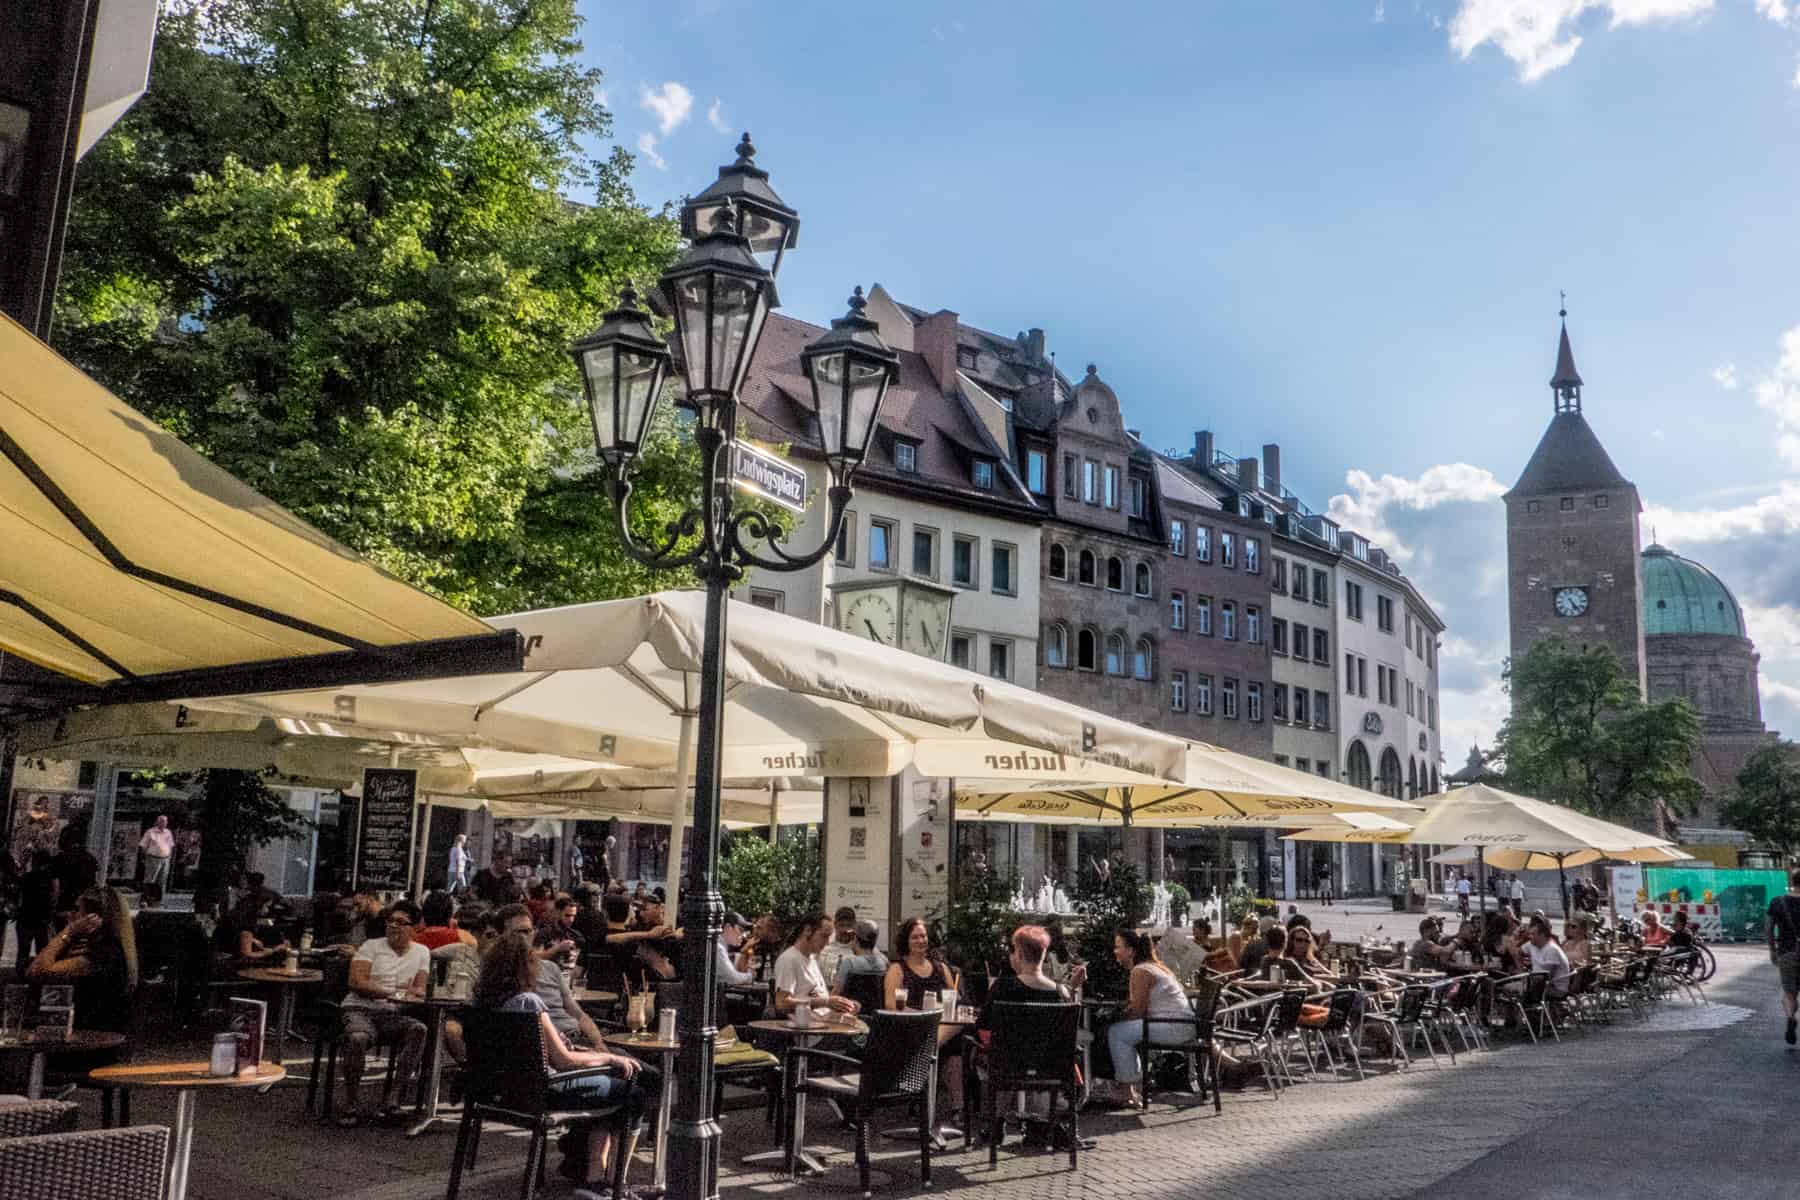 A long line of al fresco dining tables under yellow umbrellas sit within a square in Nuremberg Old Town